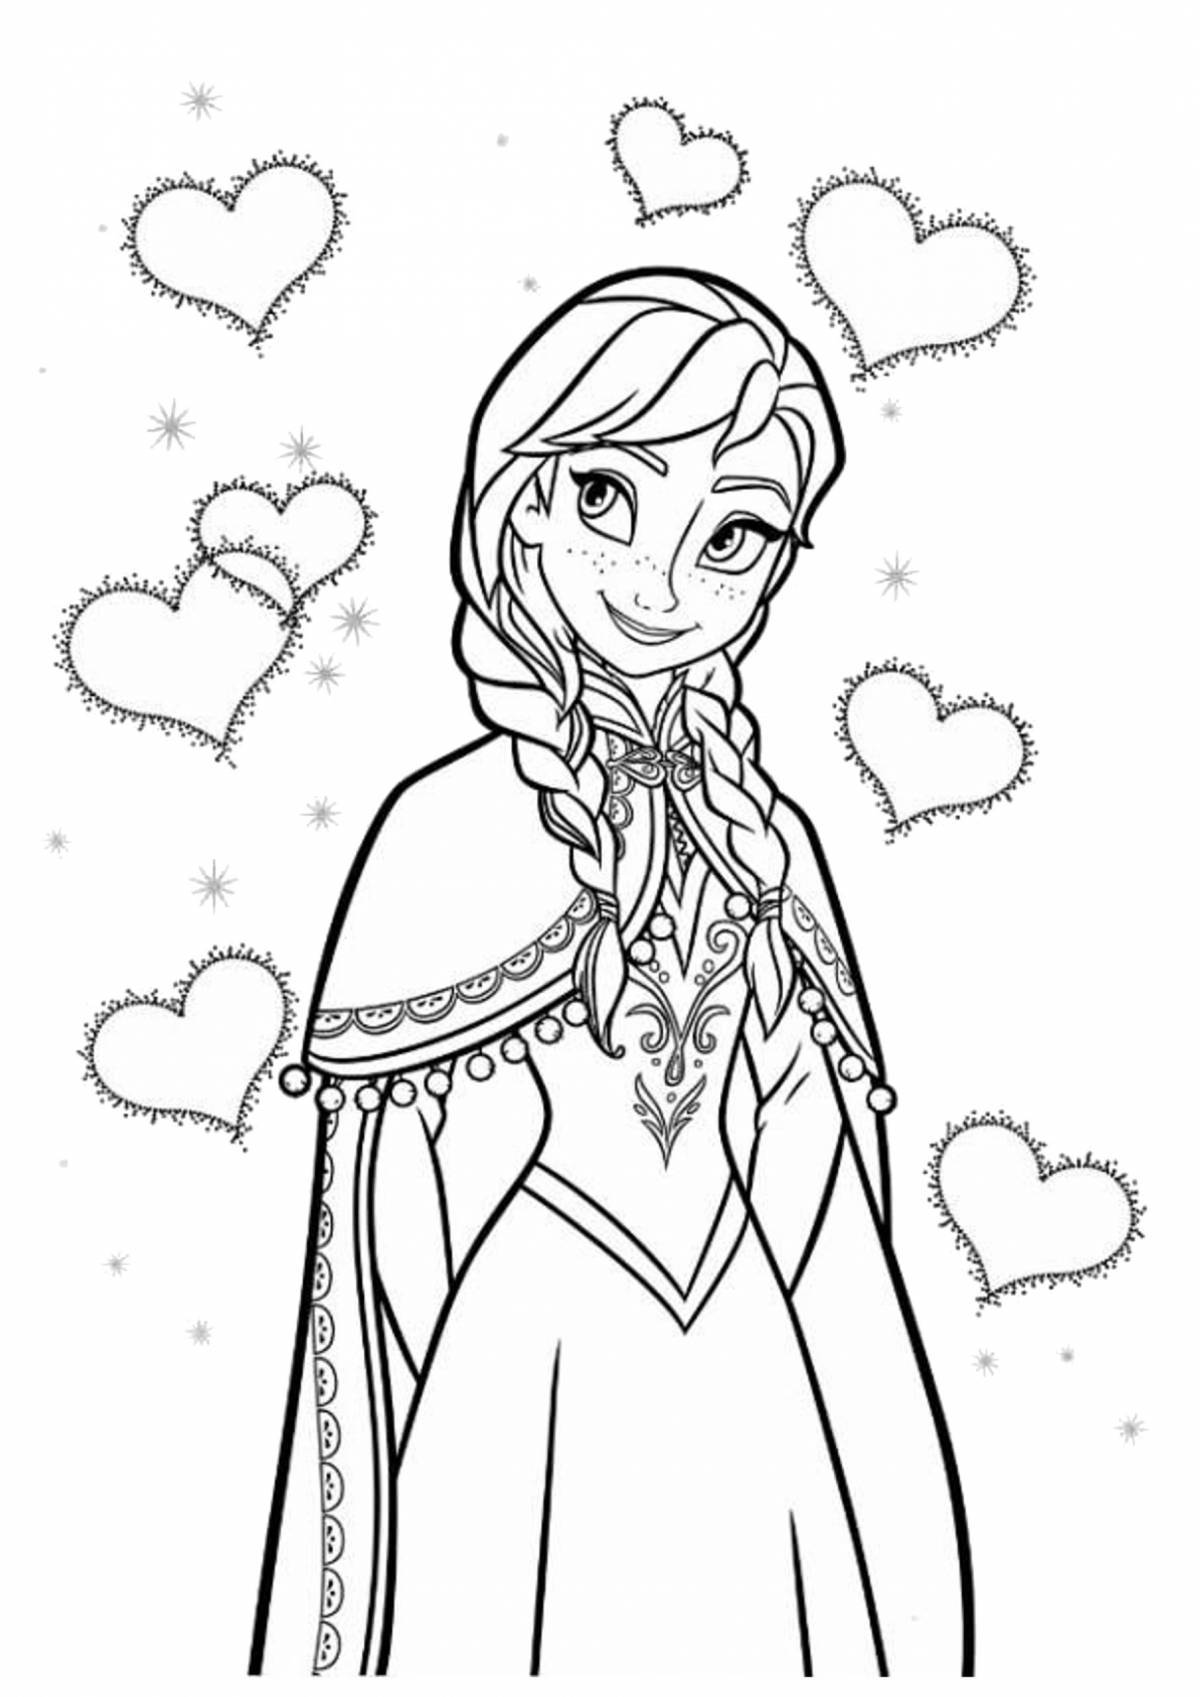 Elsa and Anna Frozen shining coloring book